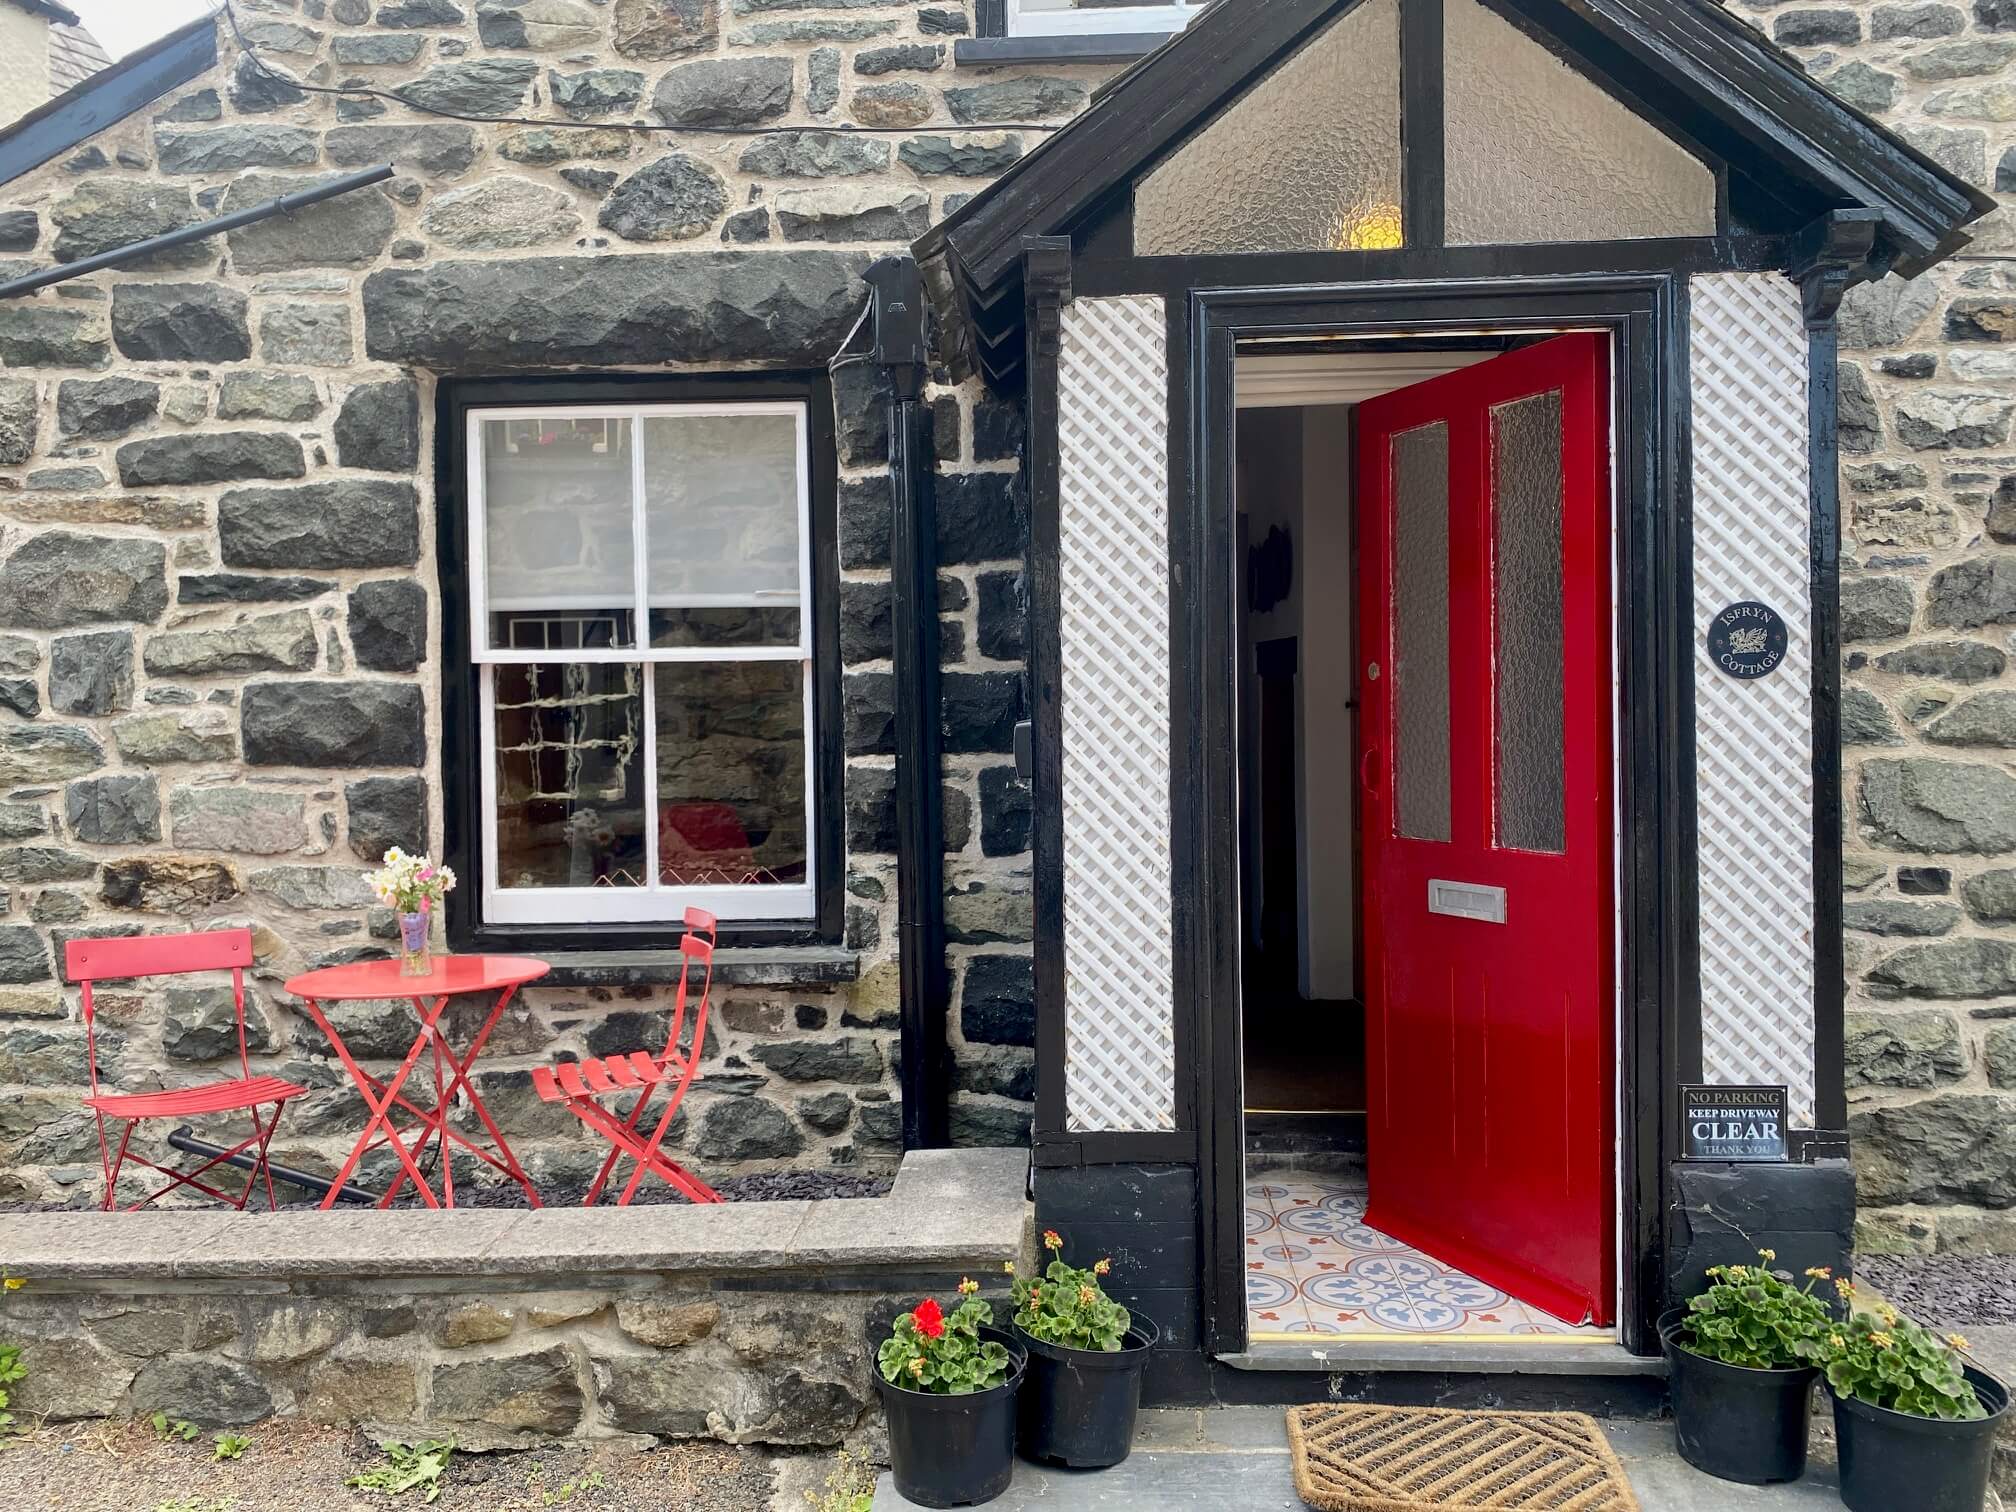 snowdonia holiday cottage, self catering Wales